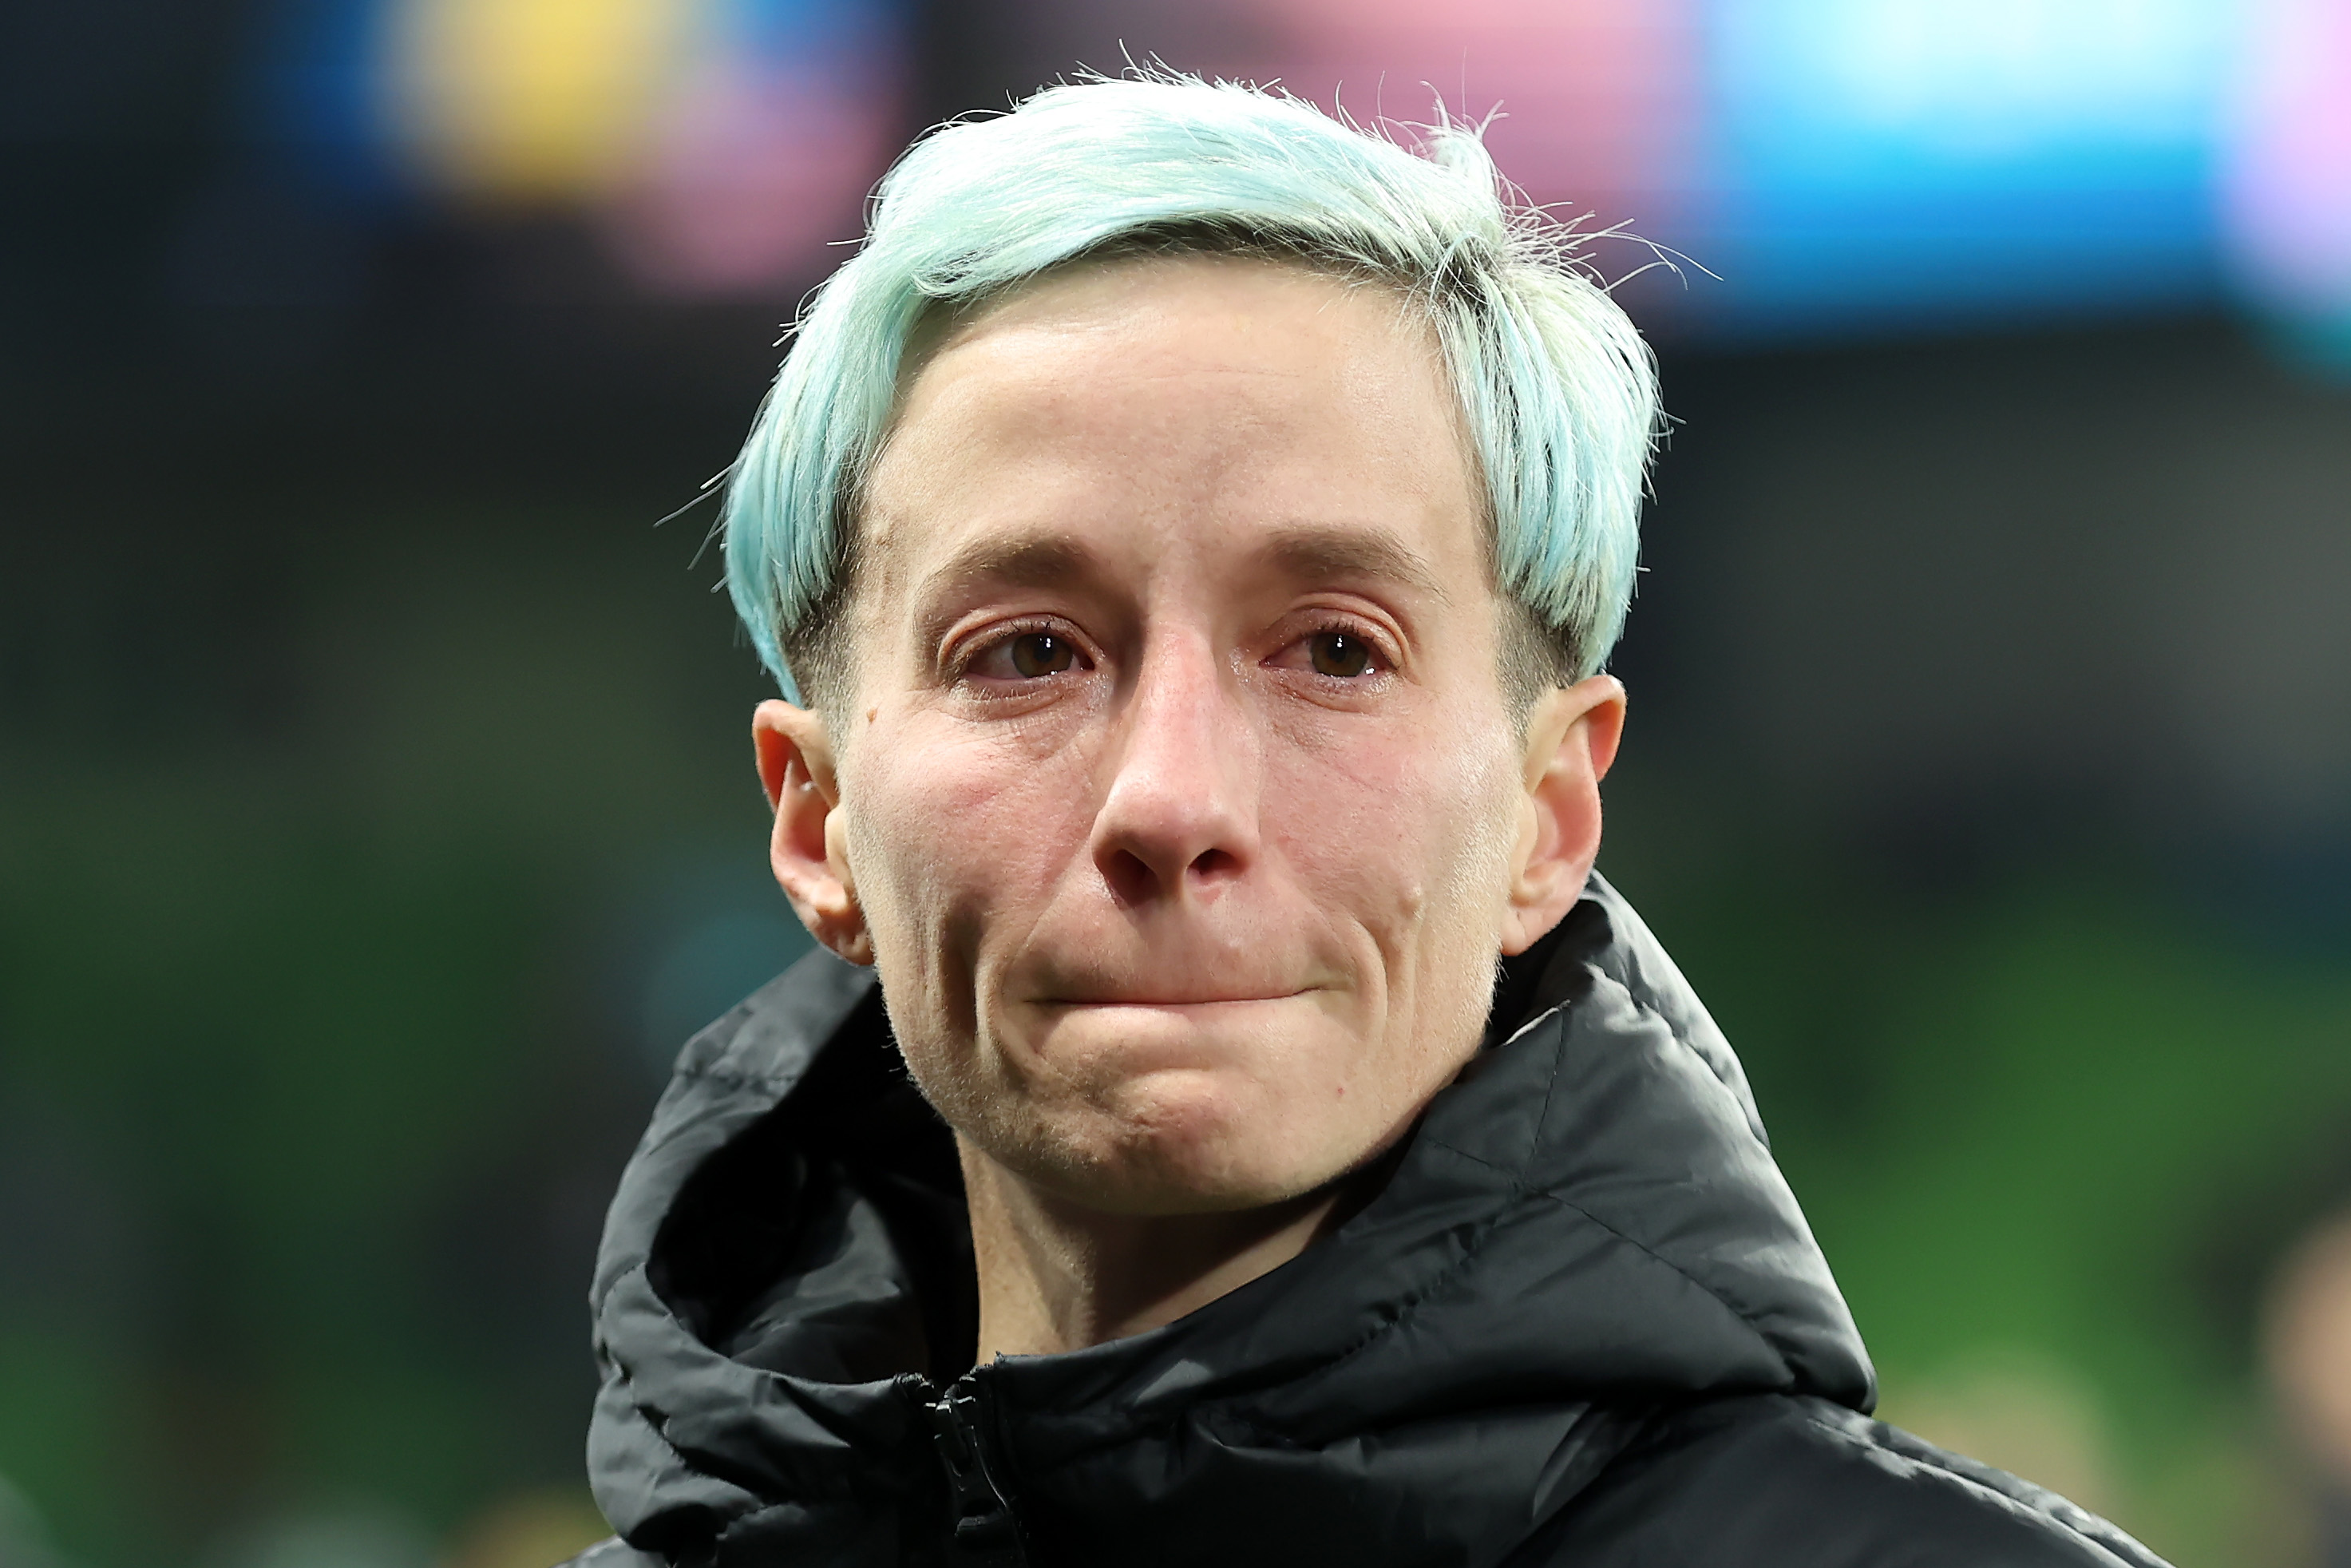 Megan Rapinoe of the USA is dejected after her team was defeated in the FIFA Women's World Cup round 16 match against Sweden on August 6, 2023, in Melbourne/Naarm, Australia | Source: Getty Images